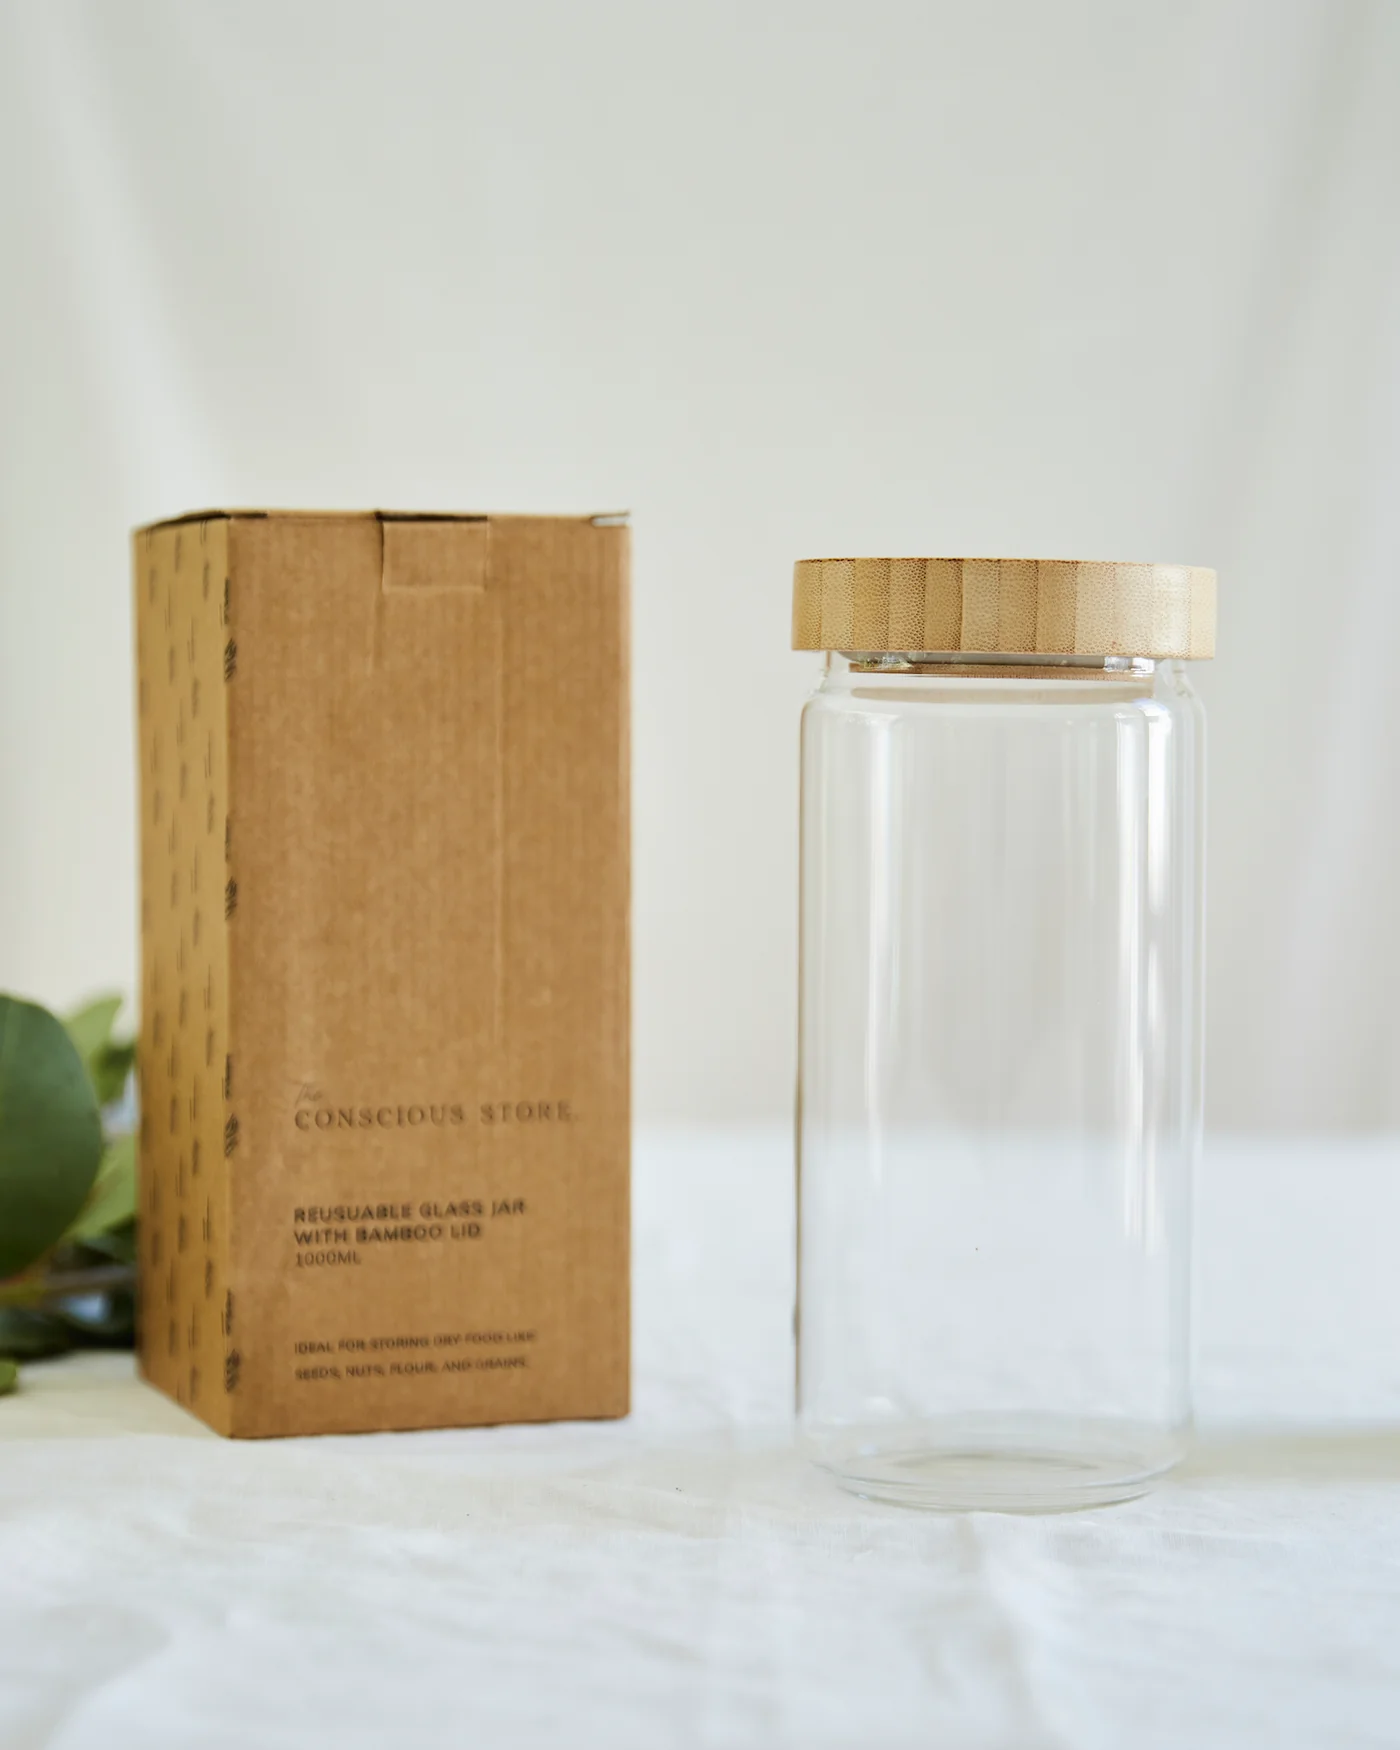 The Conscious Store - Glass Jars with Bamboo Lid